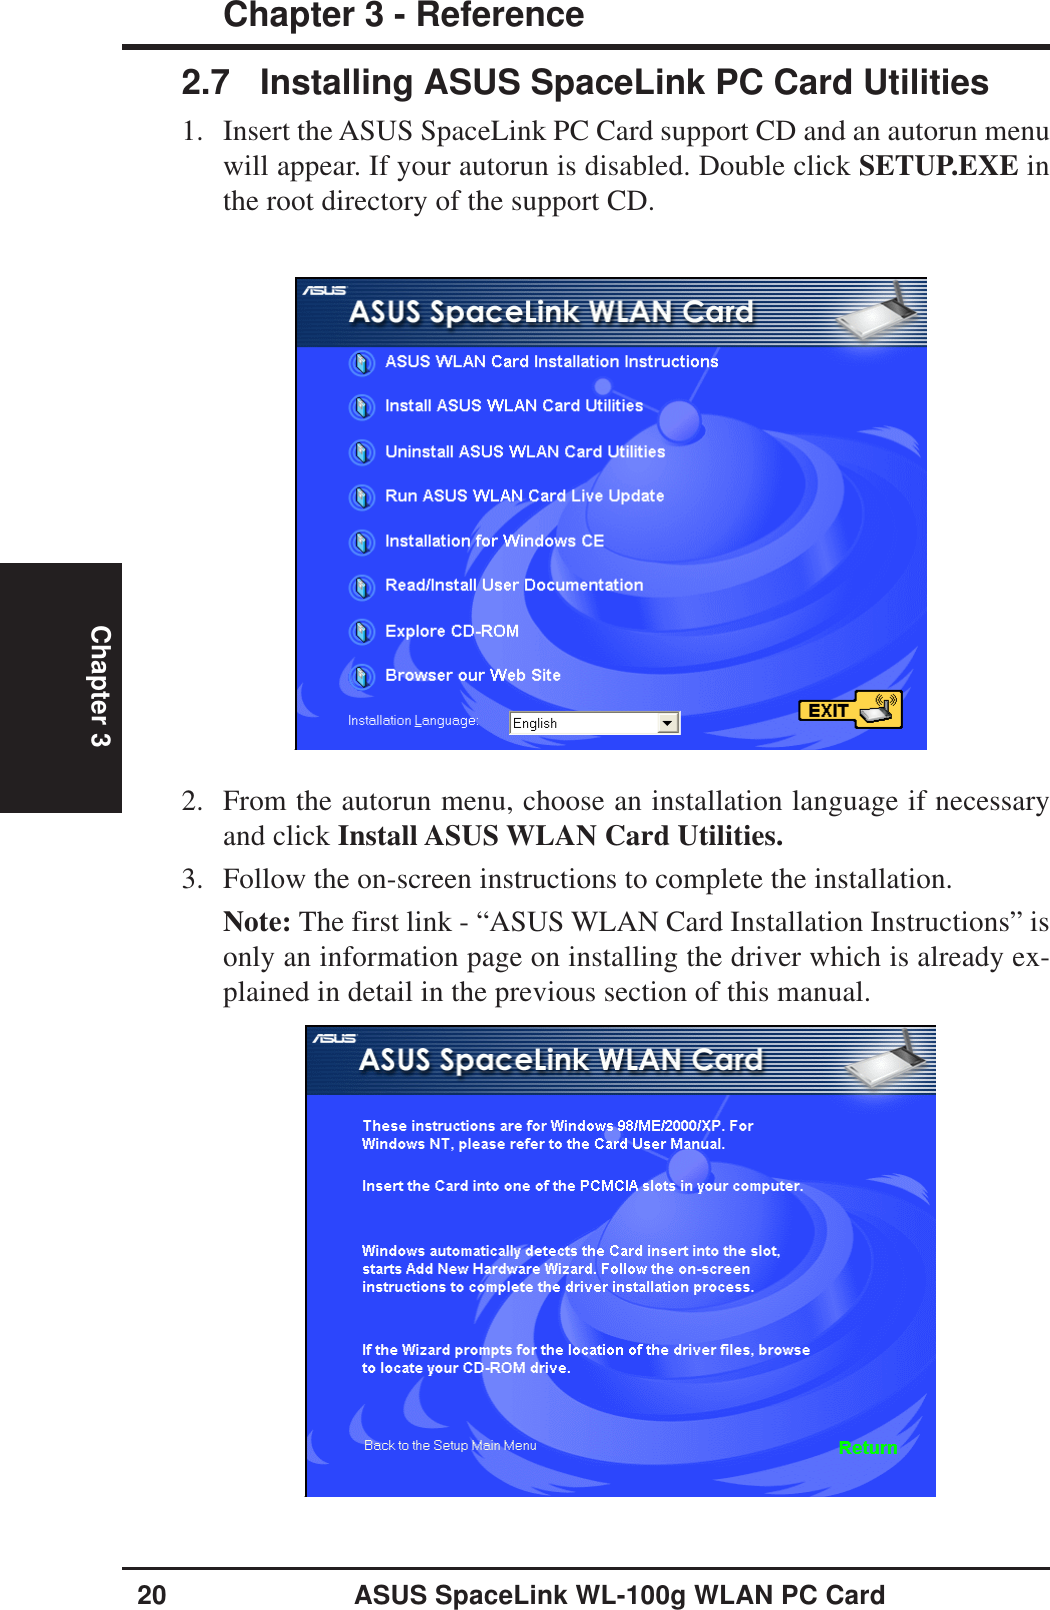 20 ASUS SpaceLink WL-100g WLAN PC CardChapter 3 - ReferenceChapter 32. From the autorun menu, choose an installation language if necessaryand click Install ASUS WLAN Card Utilities.3. Follow the on-screen instructions to complete the installation.Note: The first link - “ASUS WLAN Card Installation Instructions” isonly an information page on installing the driver which is already ex-plained in detail in the previous section of this manual.2.7 Installing ASUS SpaceLink PC Card Utilities1. Insert the ASUS SpaceLink PC Card support CD and an autorun menuwill appear. If your autorun is disabled. Double click SETUP.EXE inthe root directory of the support CD.